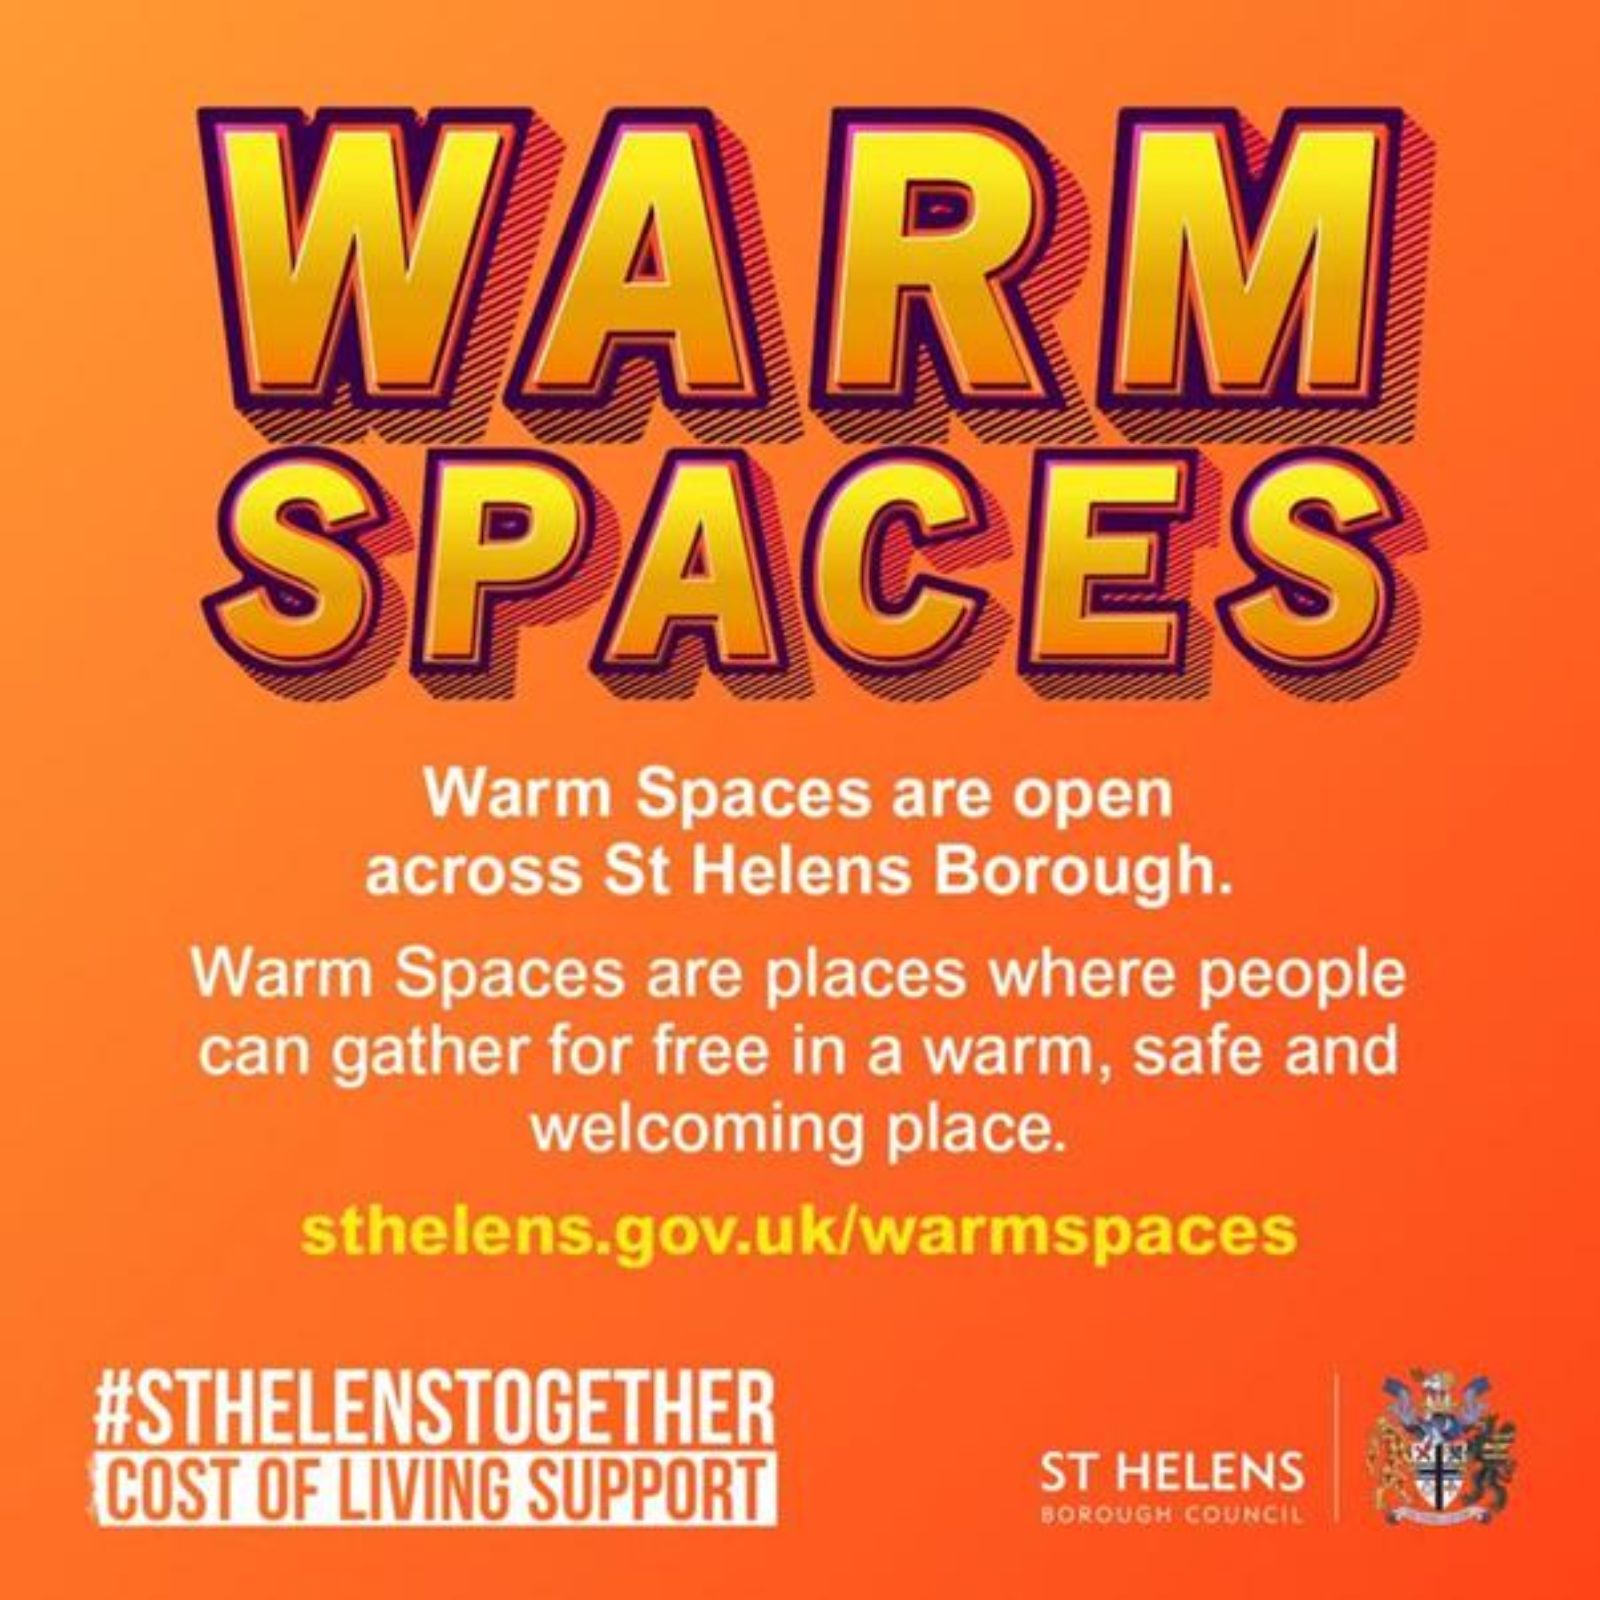 Warm Spaces; Warm spaces are open across St Helens Borough